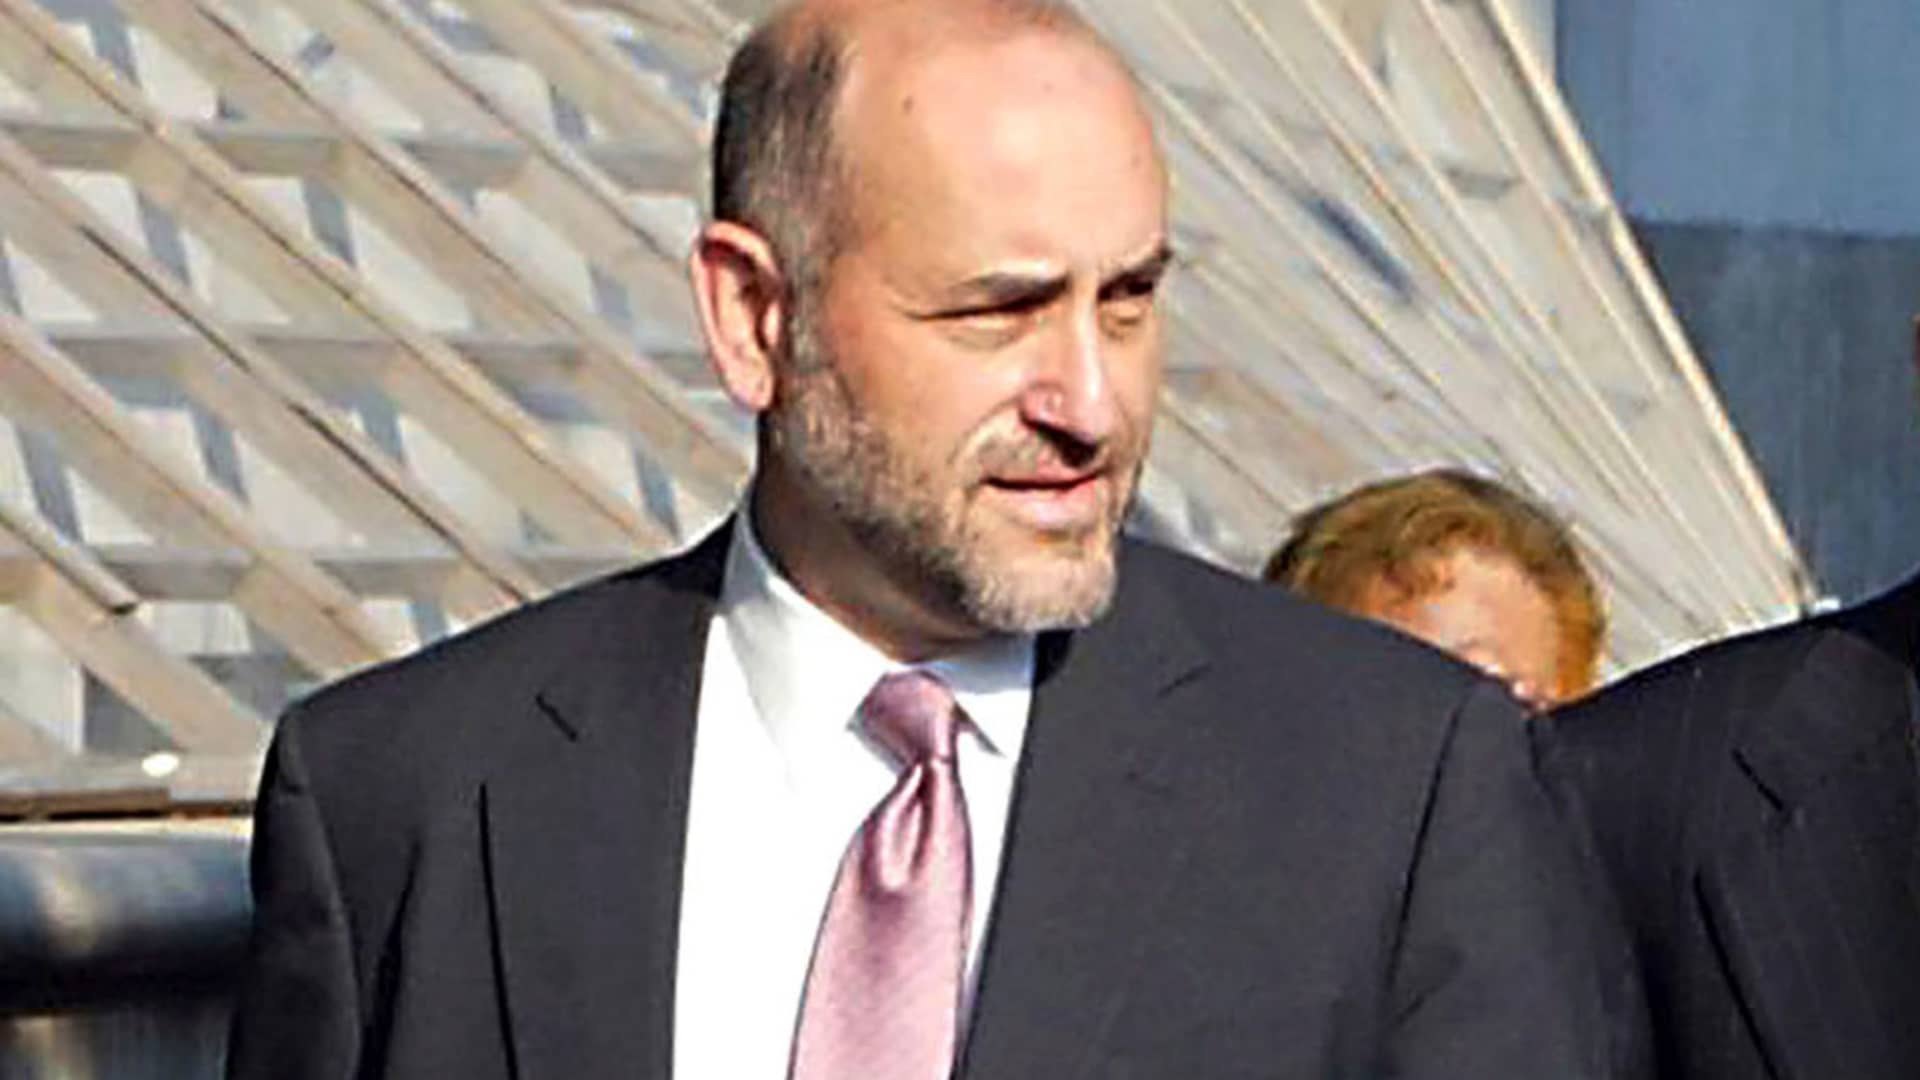 In this Aug. 12, 2002 file photo, attorney Mark Pomerantz arrives at Federal Court in New York. New York prosecutors, including recently hired former mafia prosecutor Mark Pomerantz, have met for an eighth time with former Donald Trump attorney Michael Cohen as part of a criminal investigation of the former president's finances.